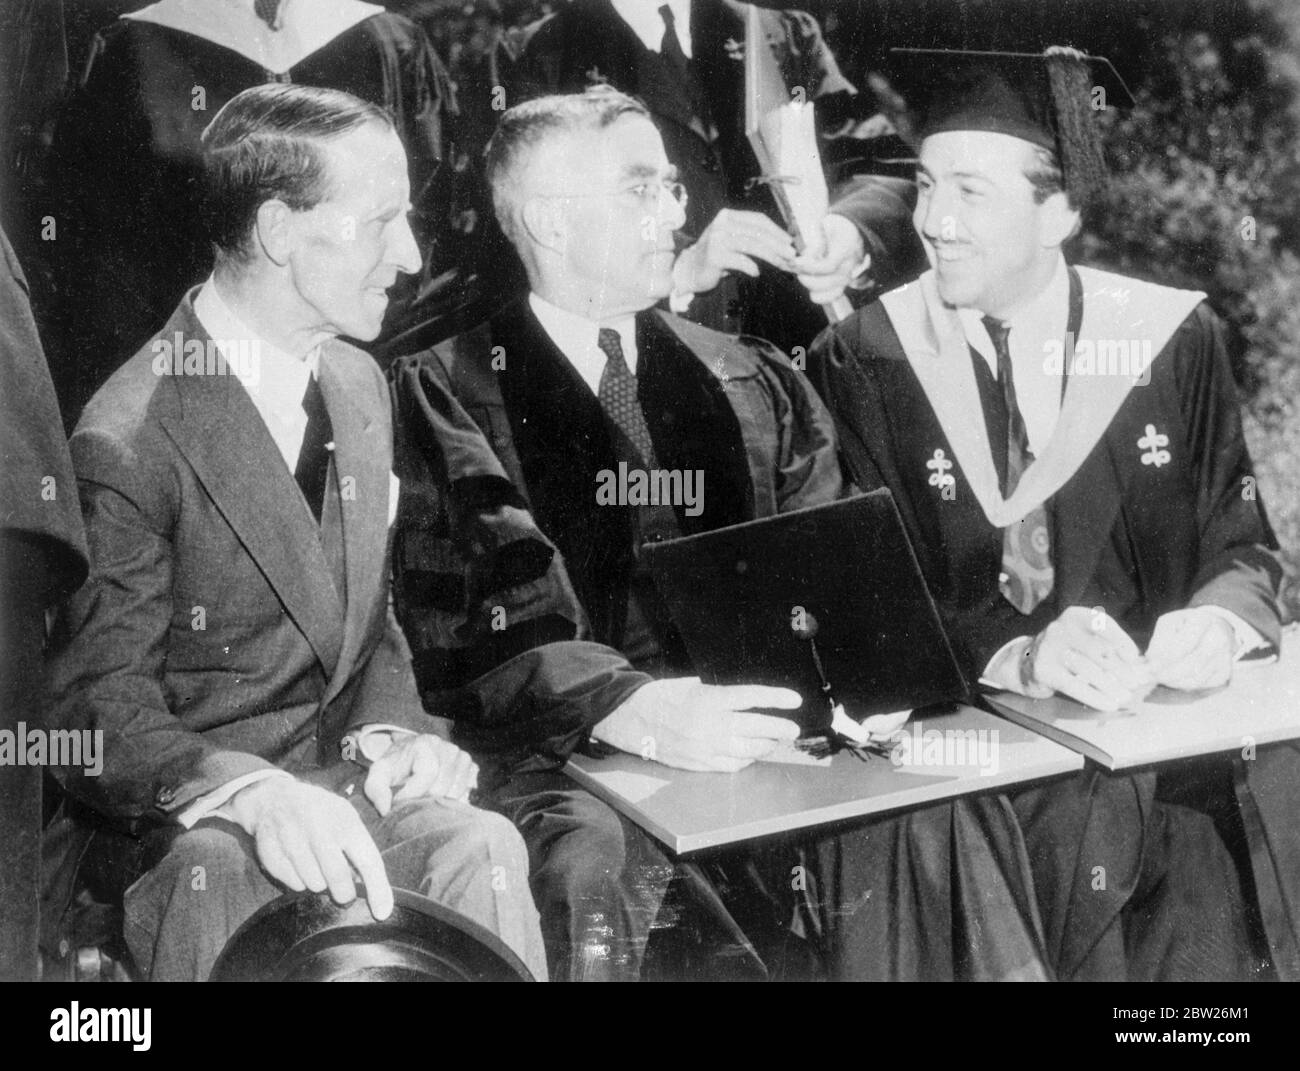 Walt Disney and lord tweedsmuir receive Harvard Degrees. Walt Disney, creator of 'Mickey Mouse', and Lord Tweedsmuir, Governor General of Canada, were among the recipients of honorary degrees at Harvard University, Cambridge Massachusetts, USA. Photo shows, left to right, lord Tweedsmuir (Doctor of Laws), Irving Langmuir, research chemist (Doctor of Science) and Walt Disney (Master of Arts). 2 July 1938 Stock Photo